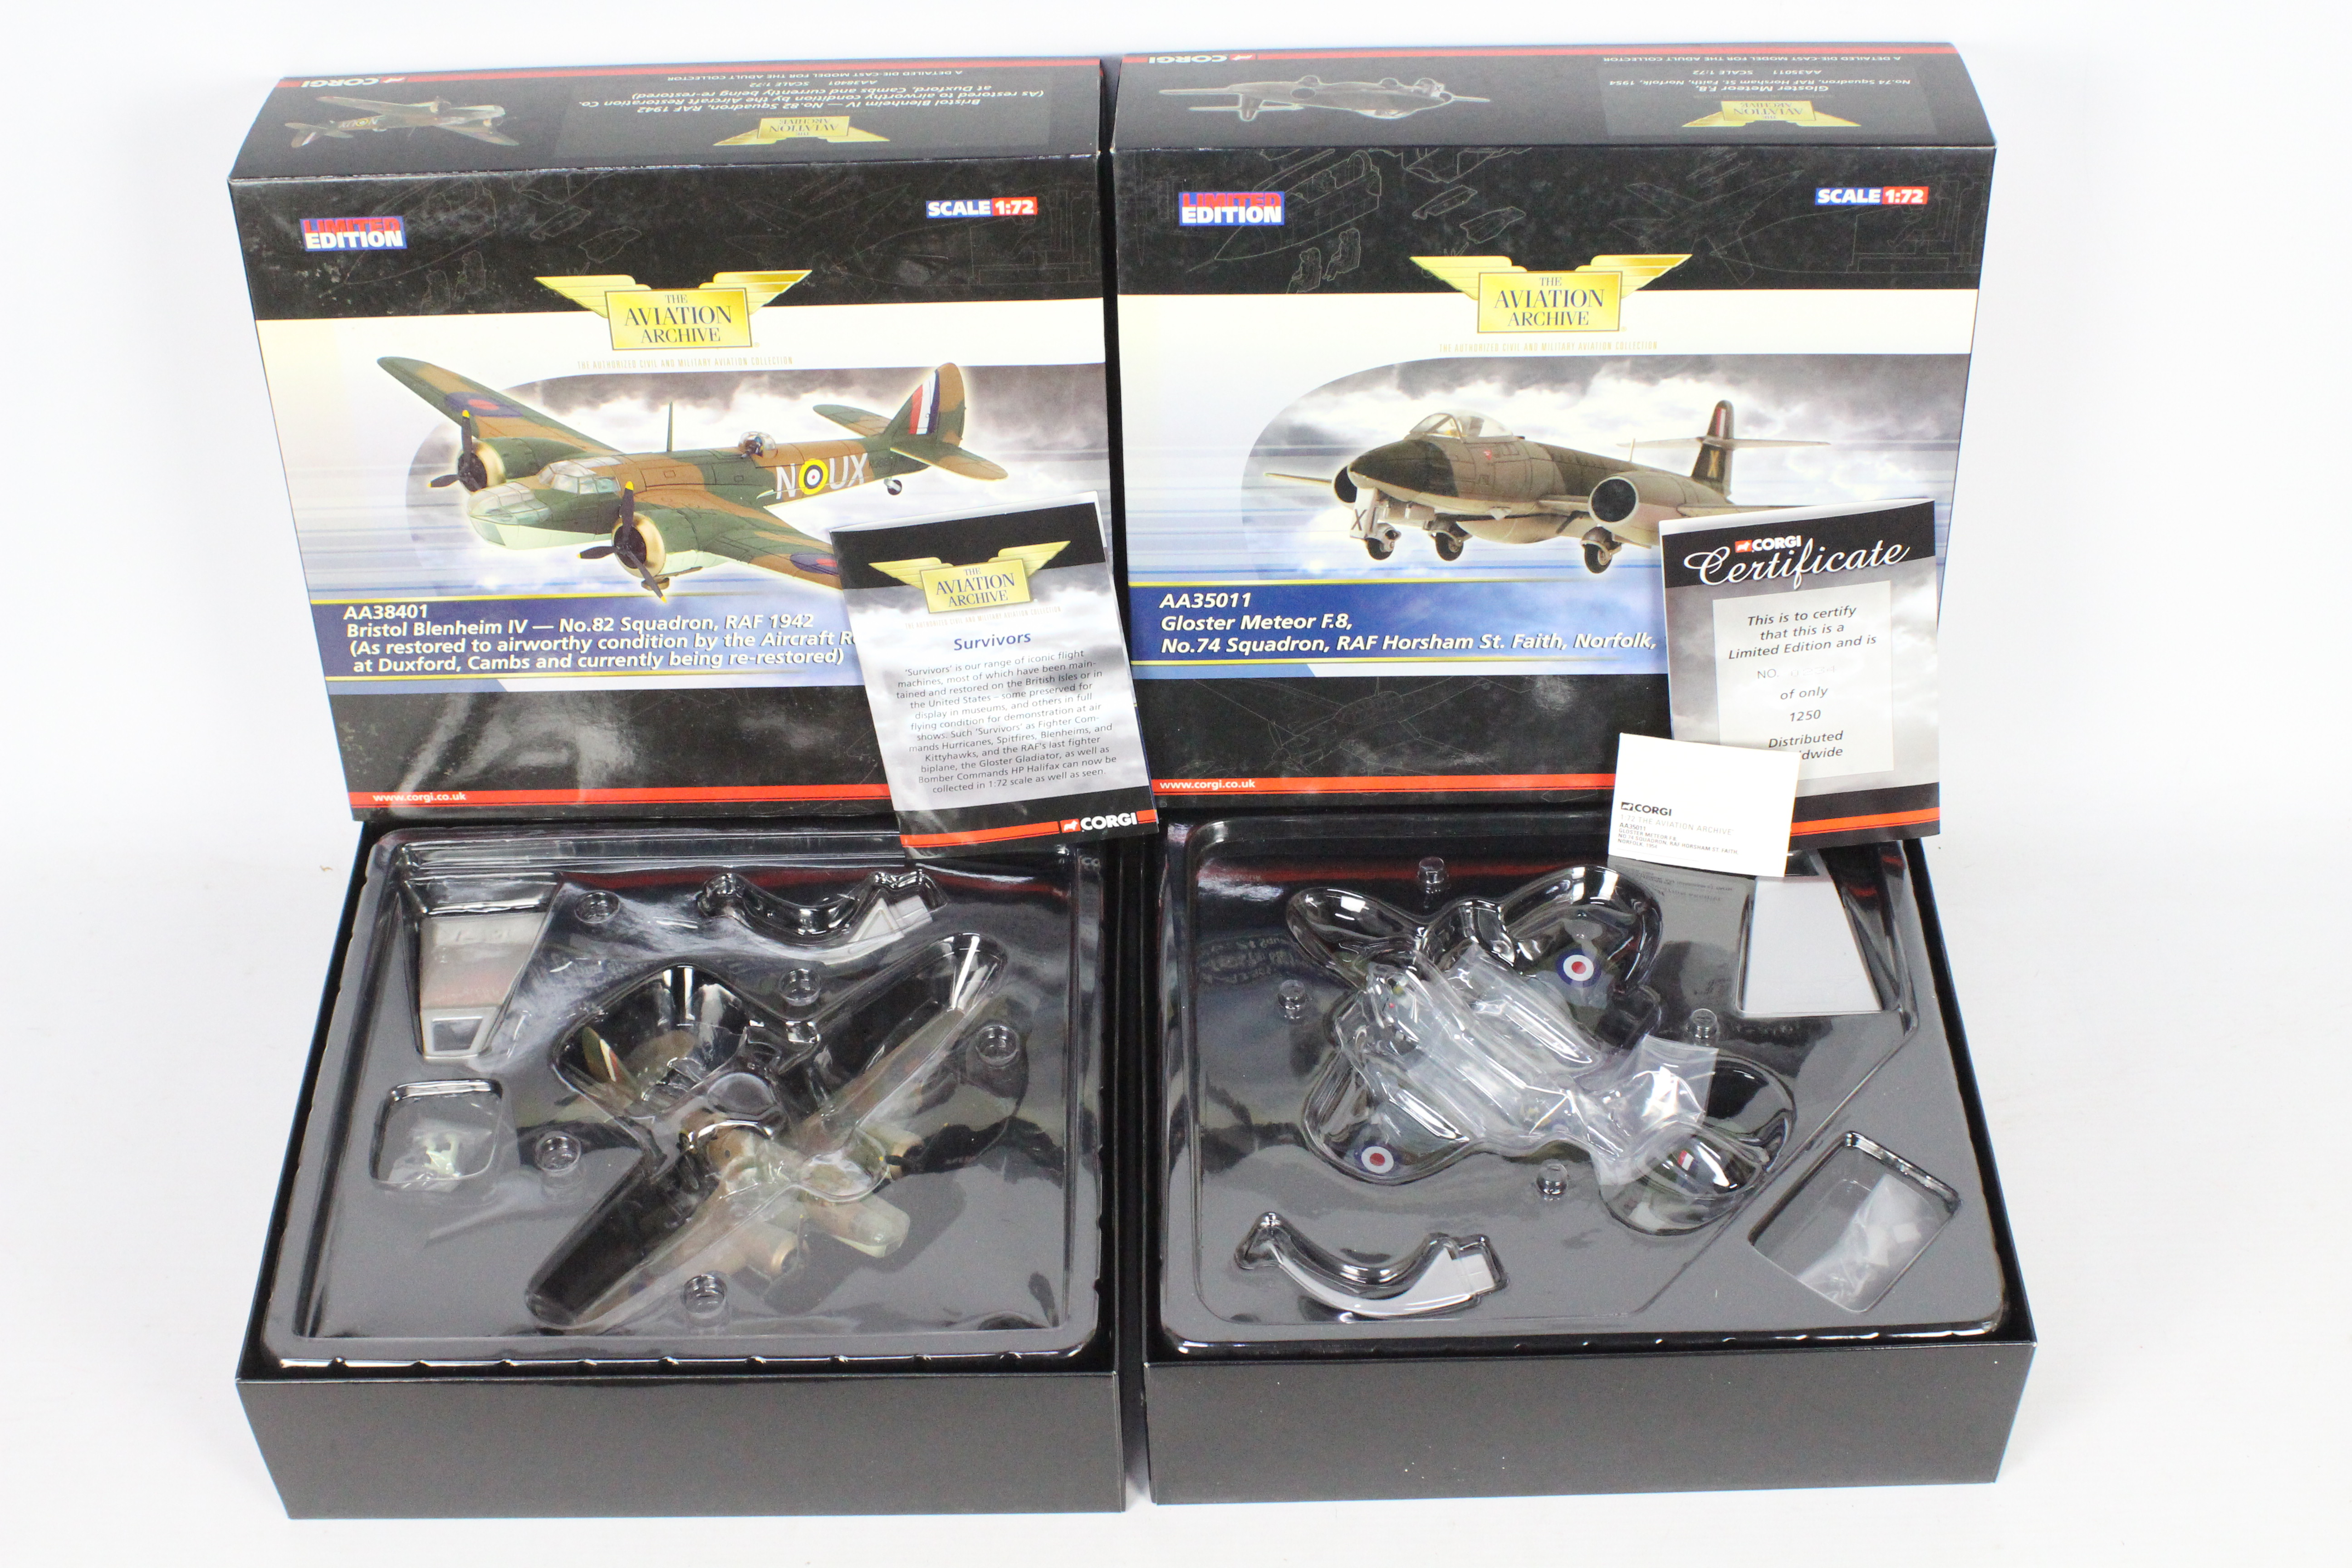 Corgi Aviation Archive - Two boxed Limited Edition 1:72 diecast model military aircraft.